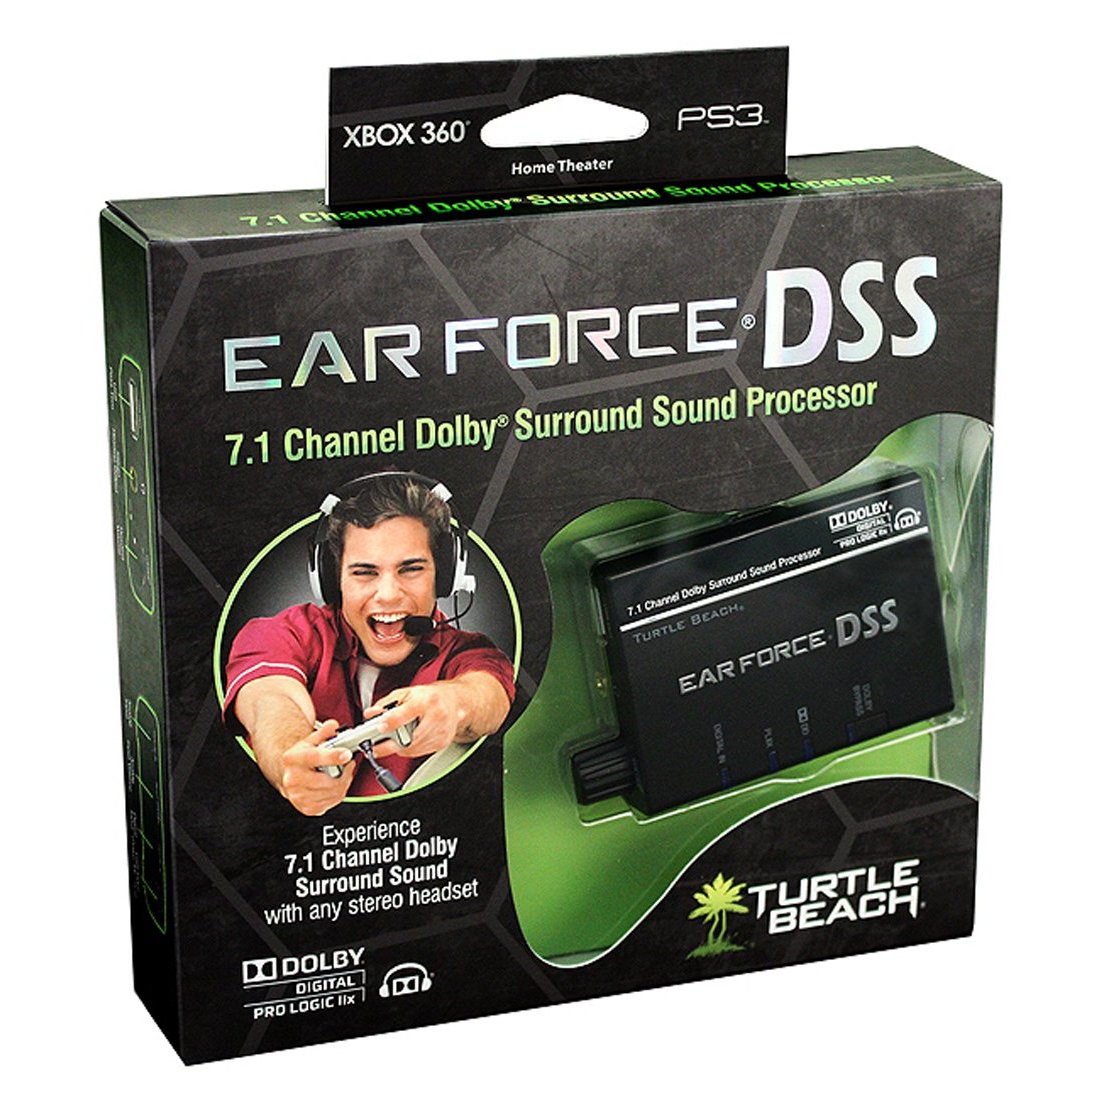 http://thetechjournal.com/wp-content/uploads/images/1108/1312565868-ear-force-dss-71-channel-dolby-surround-sound-processor-1.jpg